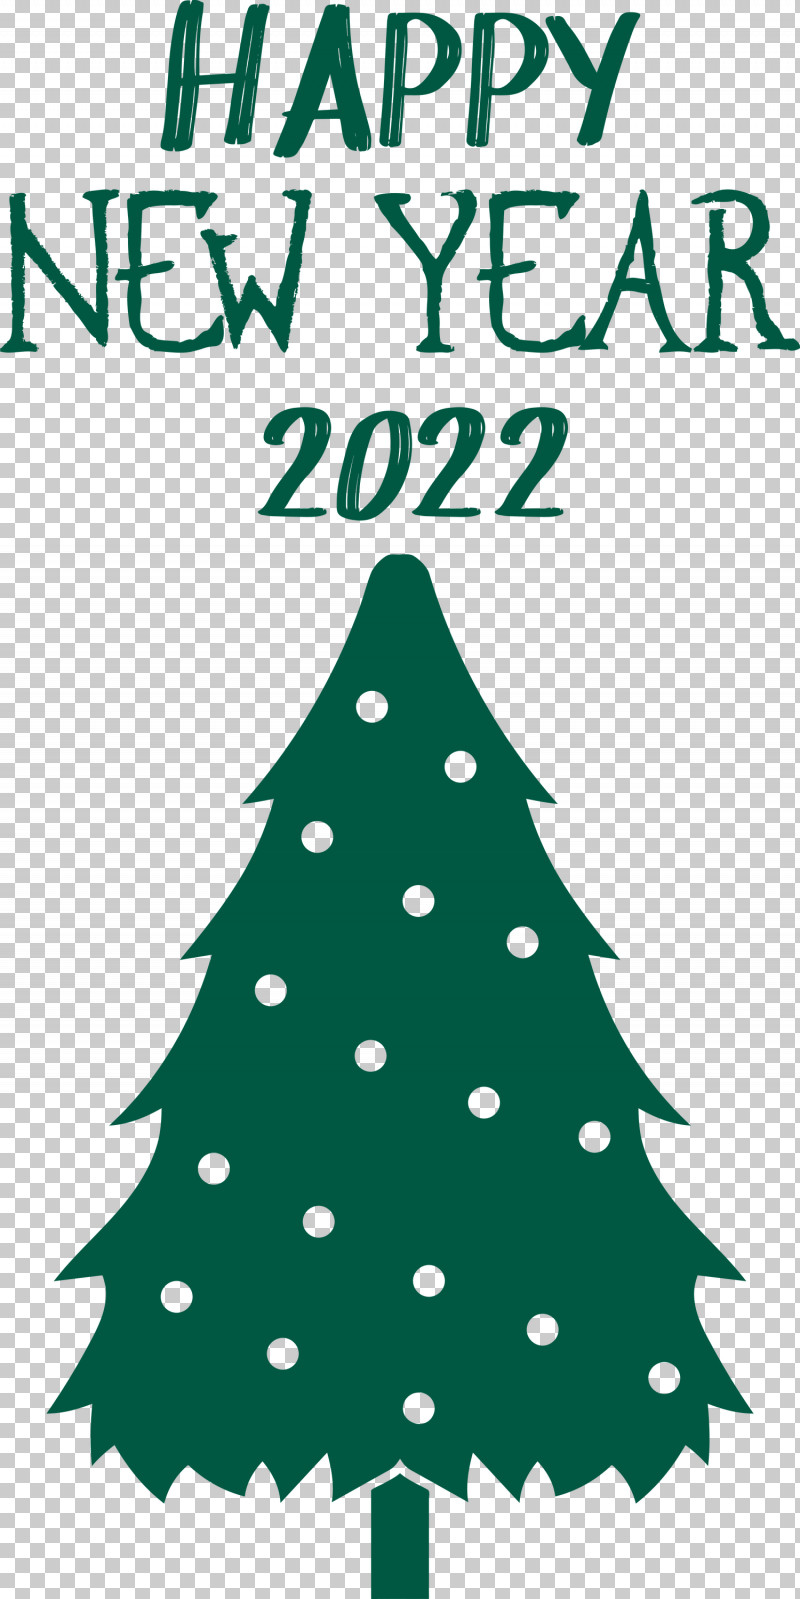 Happy New Year 2022 2022 New Year 2022 PNG, Clipart, Bauble, Christmas Day, Christmas Tree, Green, Holiday Free PNG Download